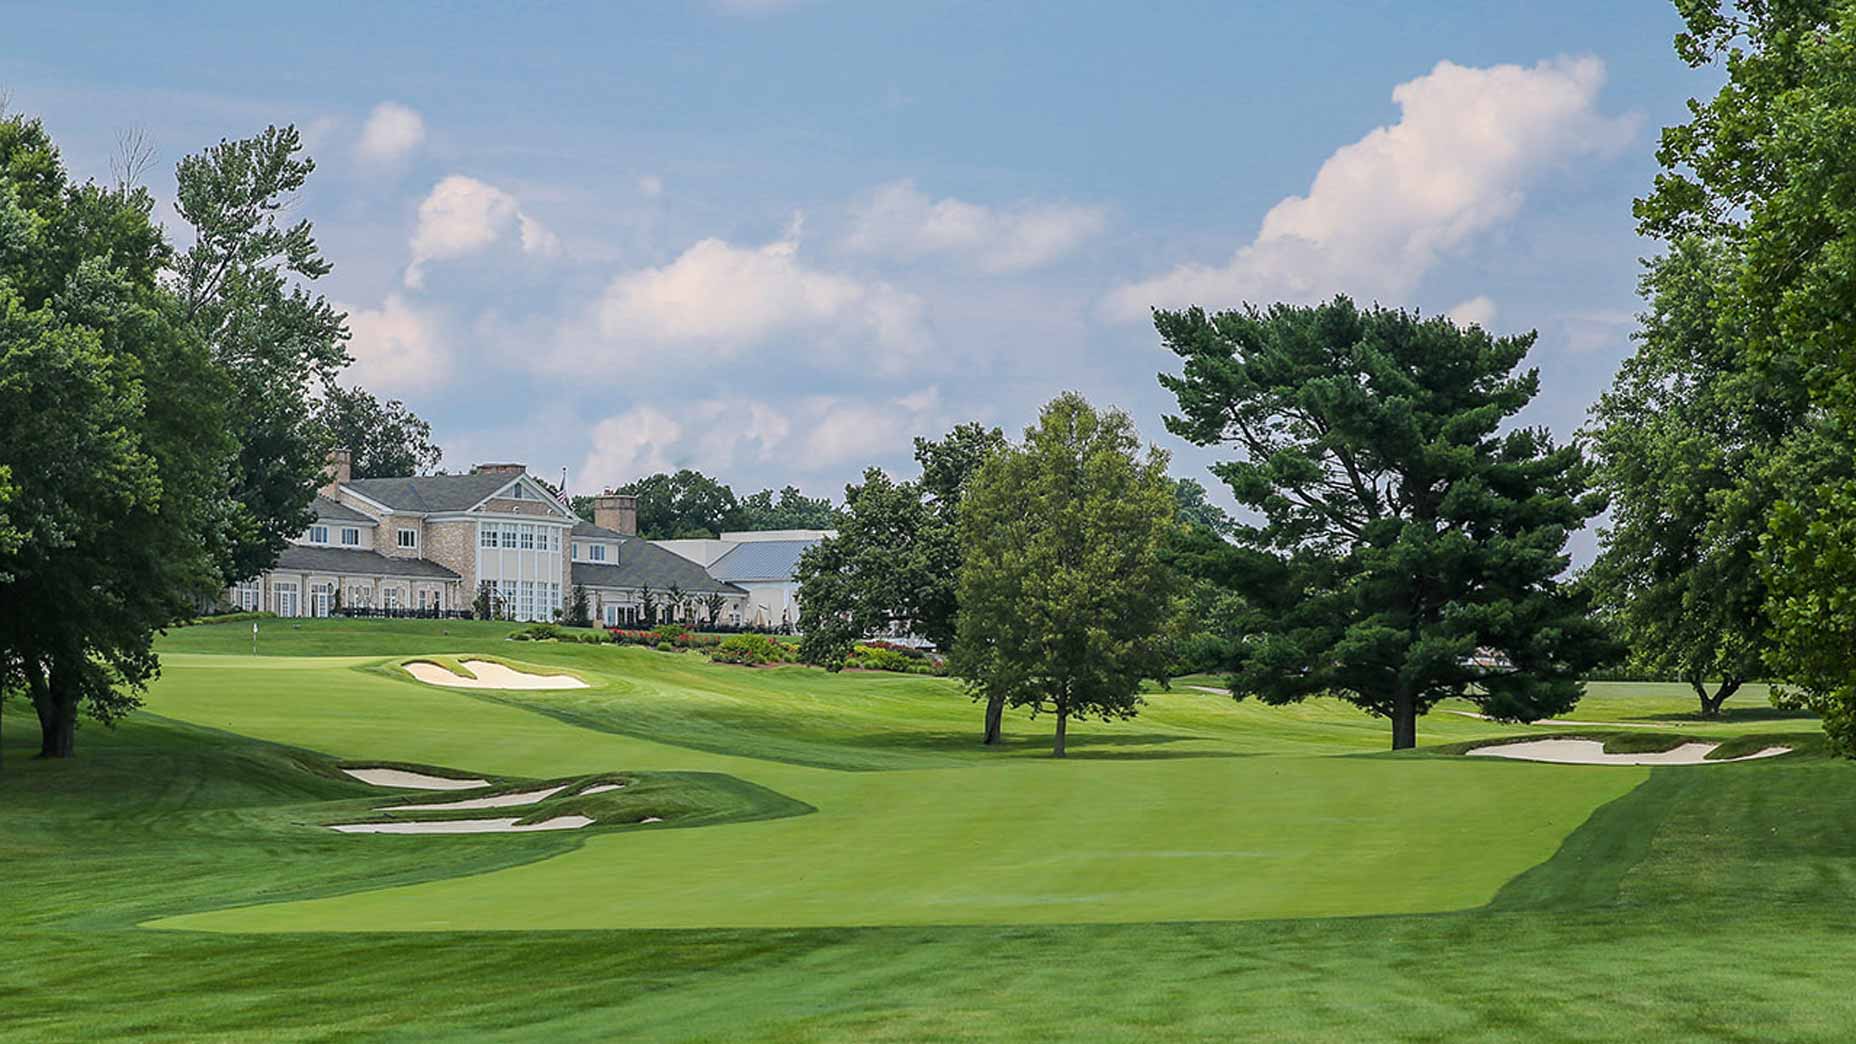 Best golf courses in Delaware, according to GOLF Magazine’s expert course raters